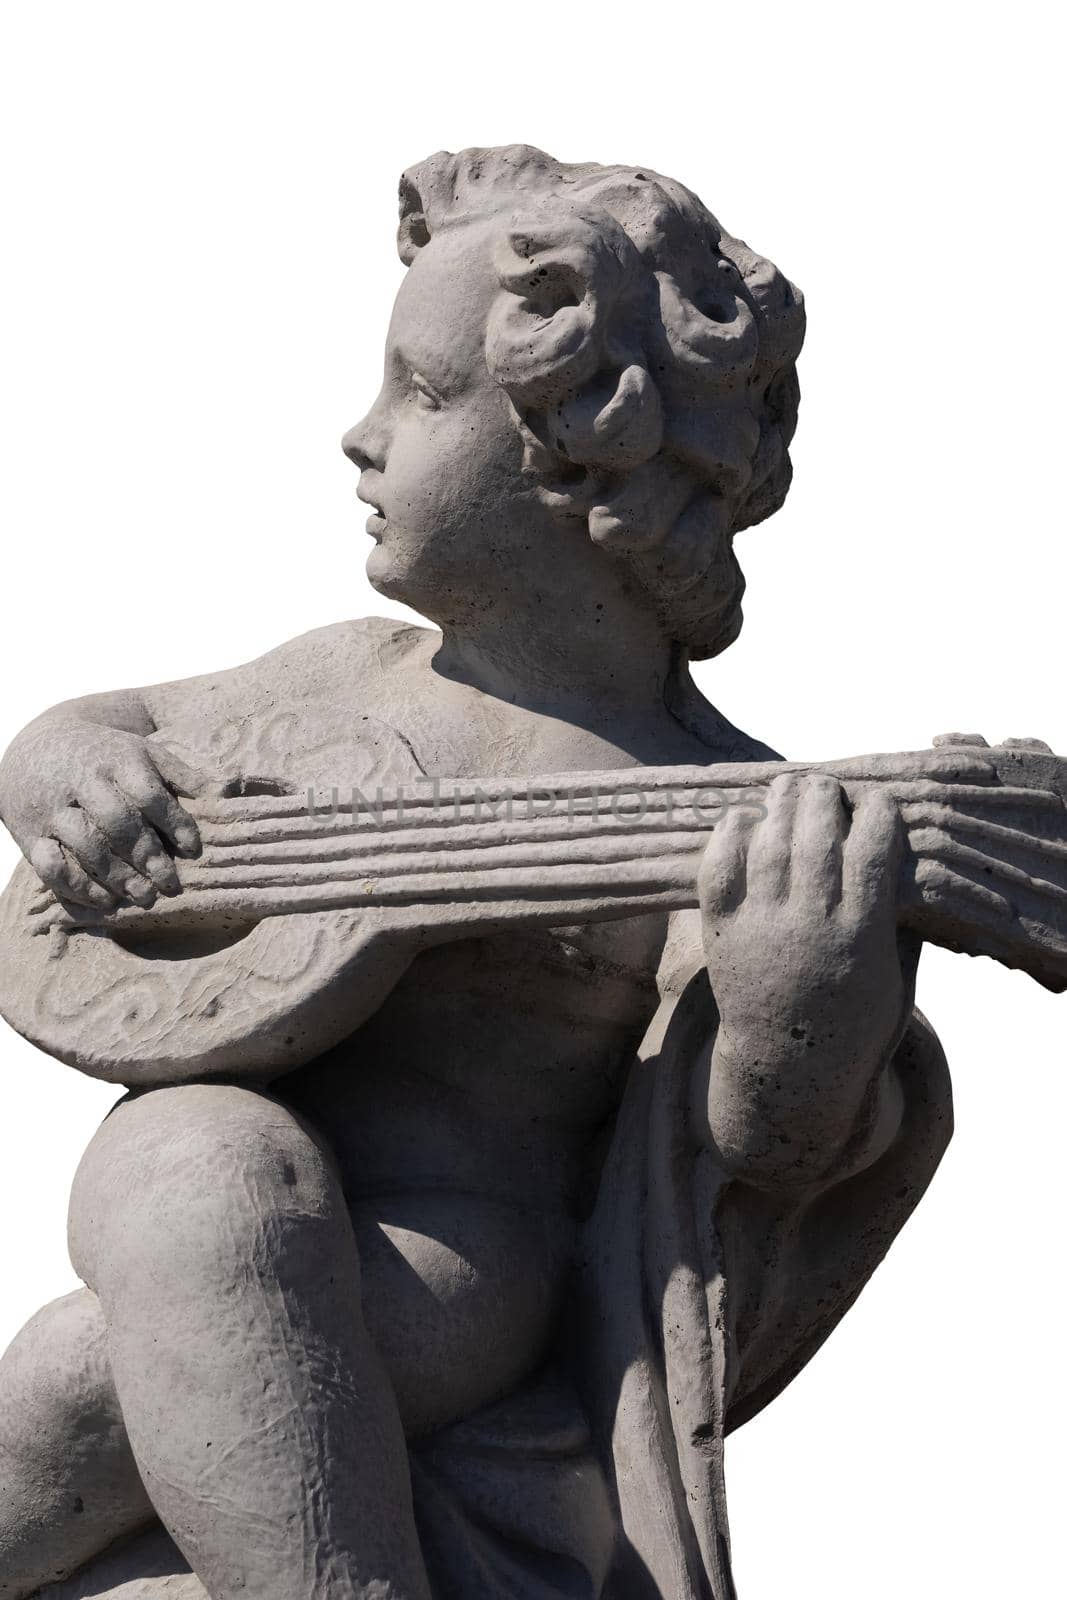 Side view of ancient stone sculpture of naked cherub playing lute on white background by Wavebreakmedia